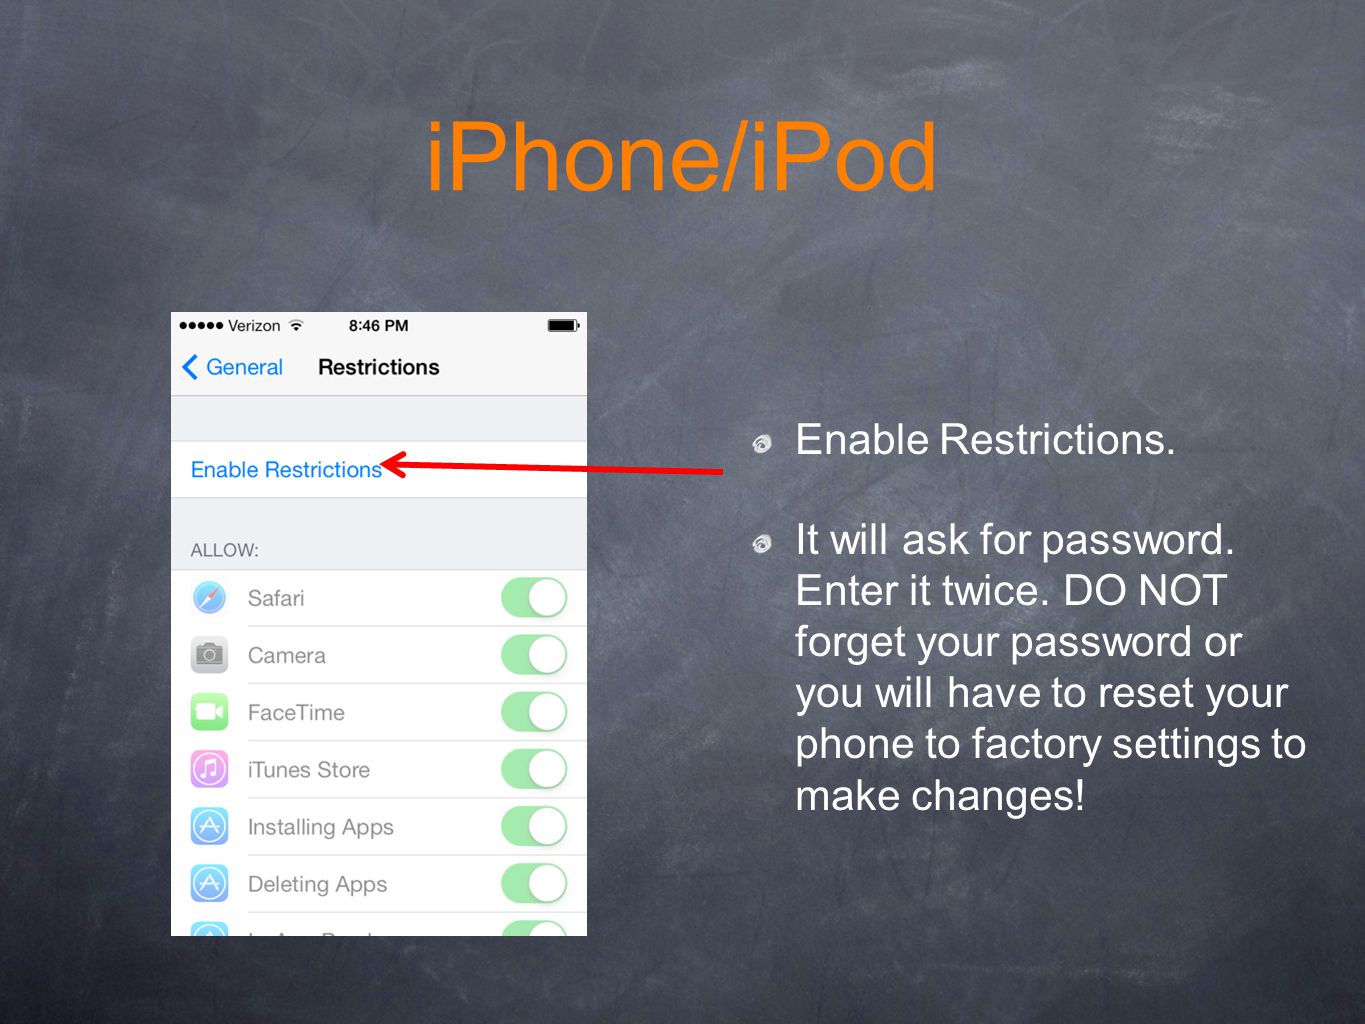 iPhone/iPod Enable Restrictions. It will ask for password.